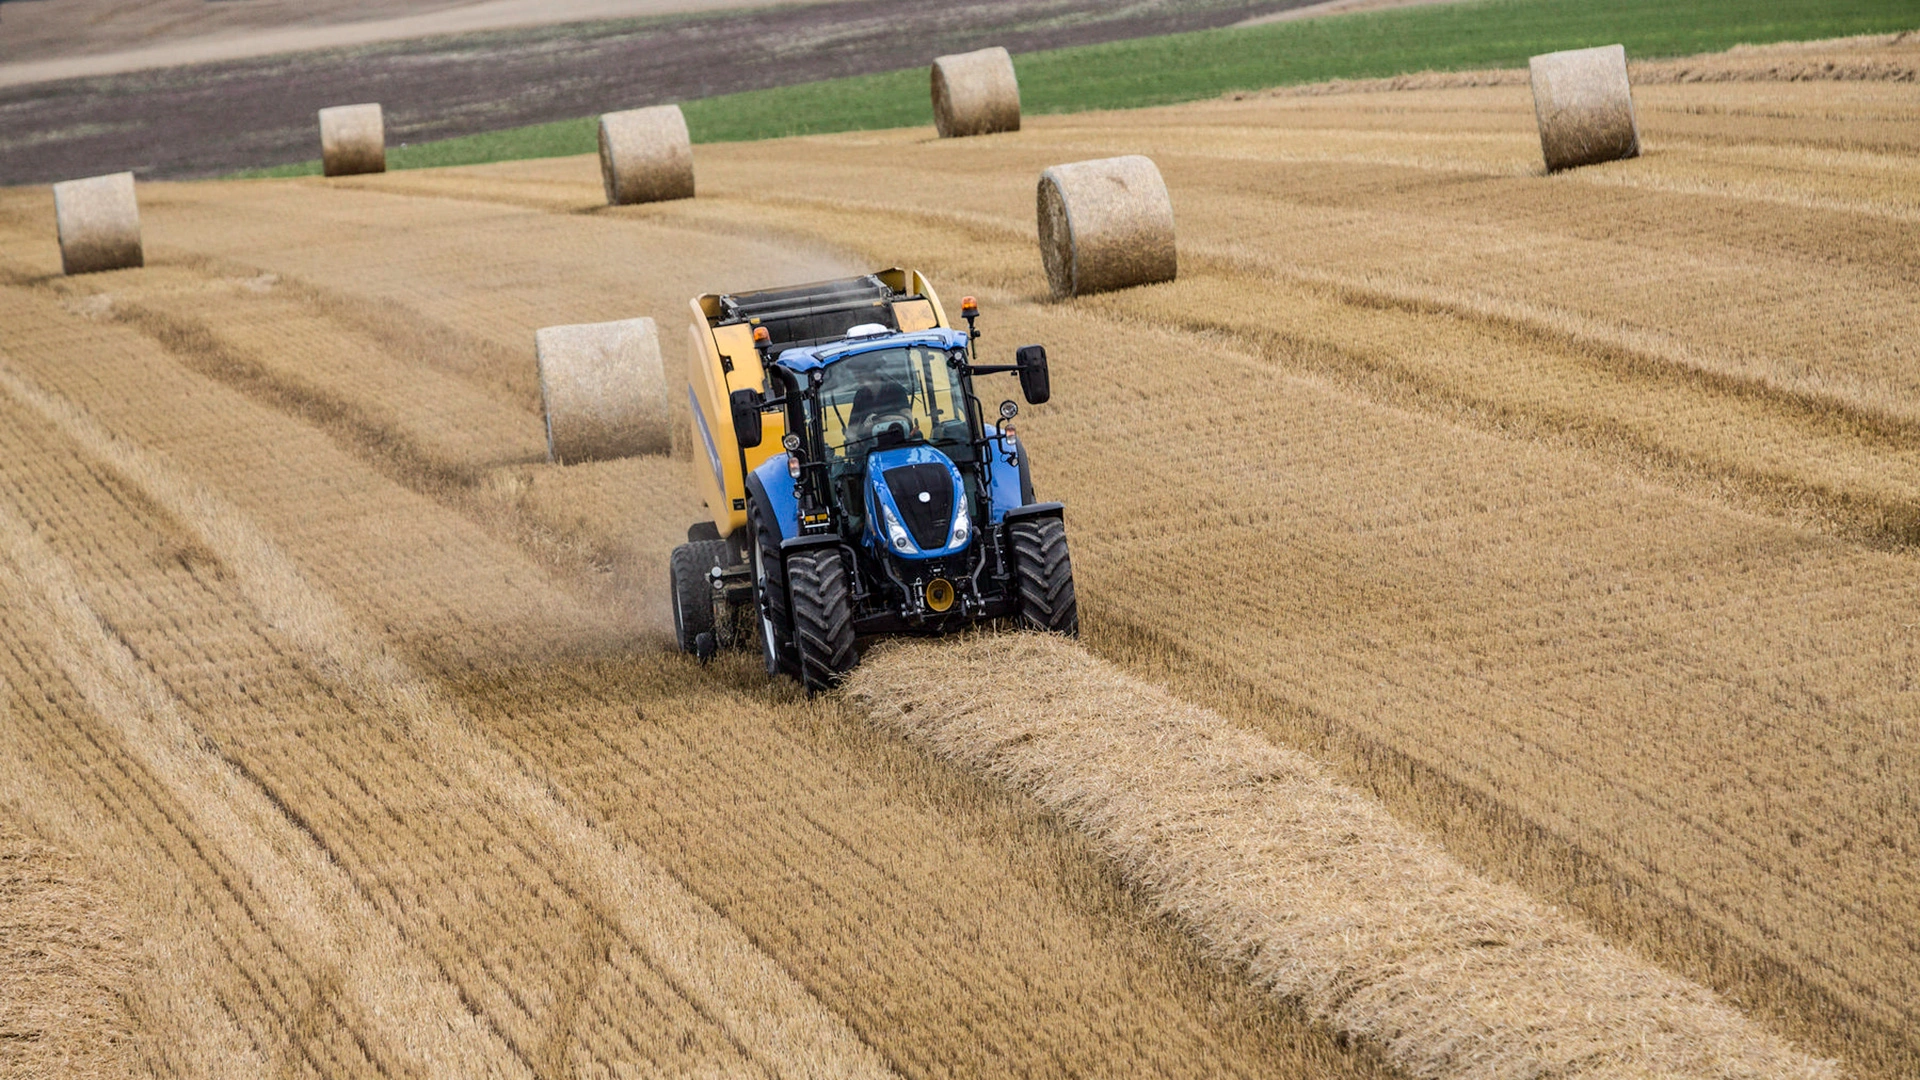 Tractor and Roll-Belt round baler combination actively bundling hay on the farmland